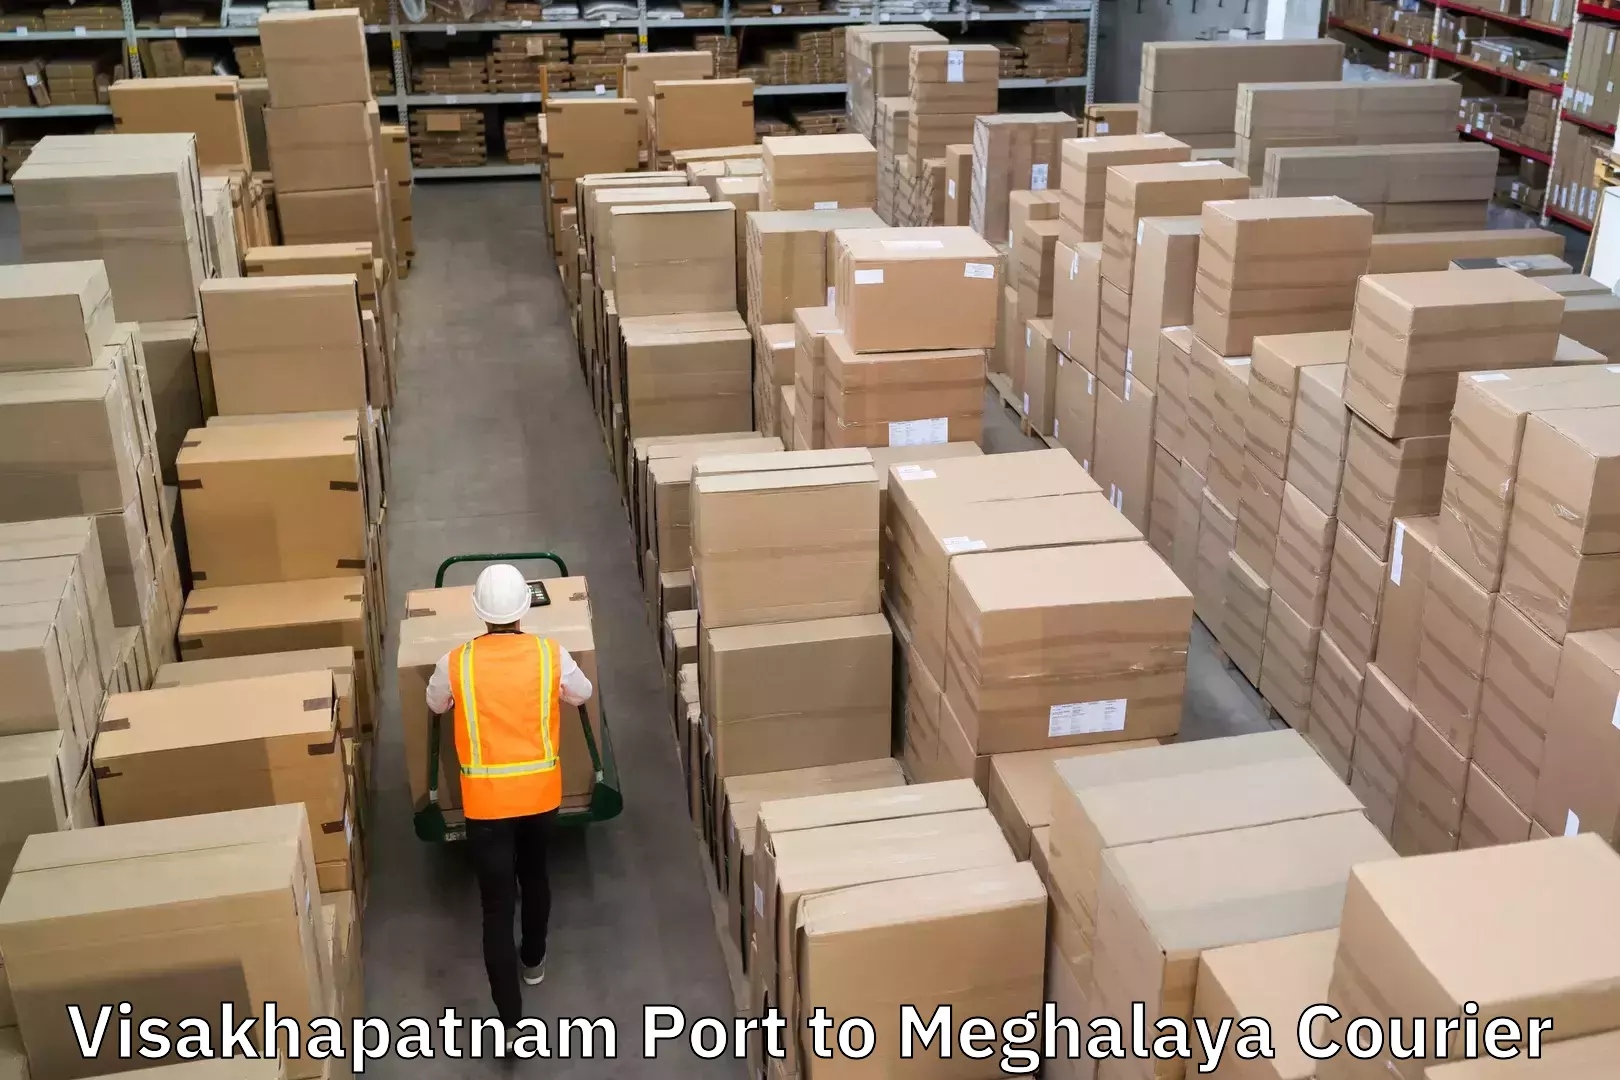 Weekend courier service Visakhapatnam Port to Meghalaya